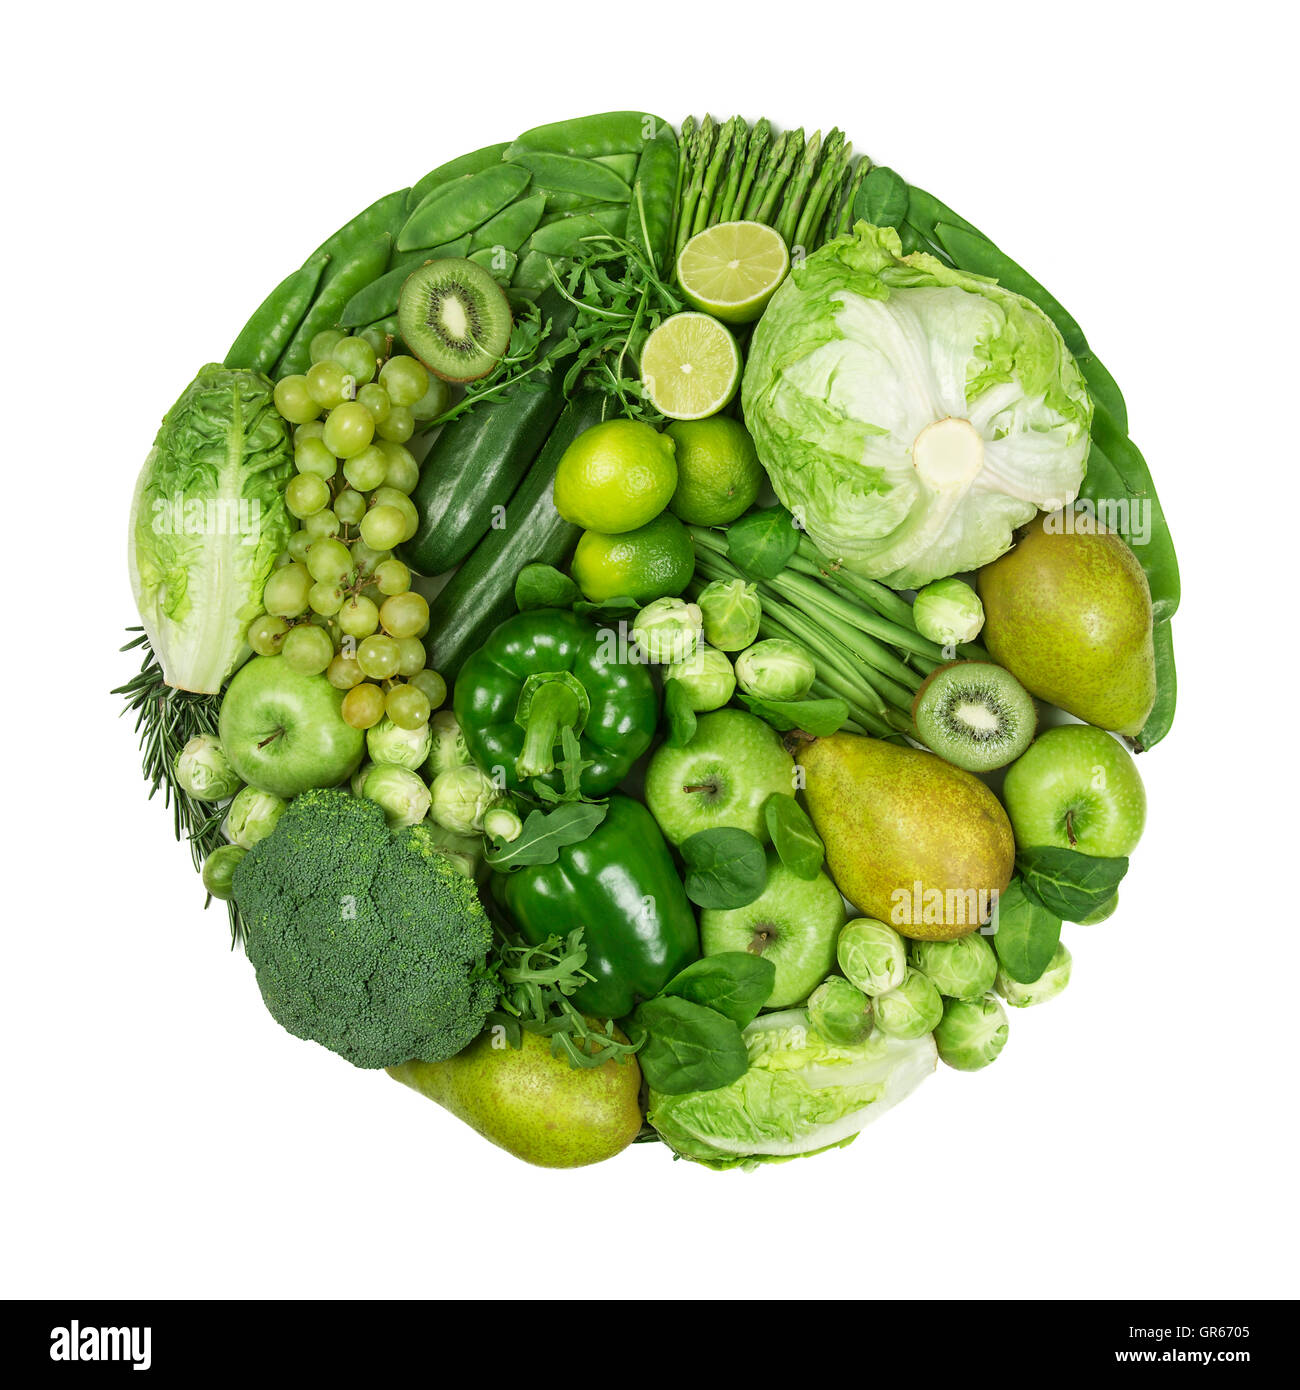 Circle of green fruits and vegetables isolated on a white background Stock Photo